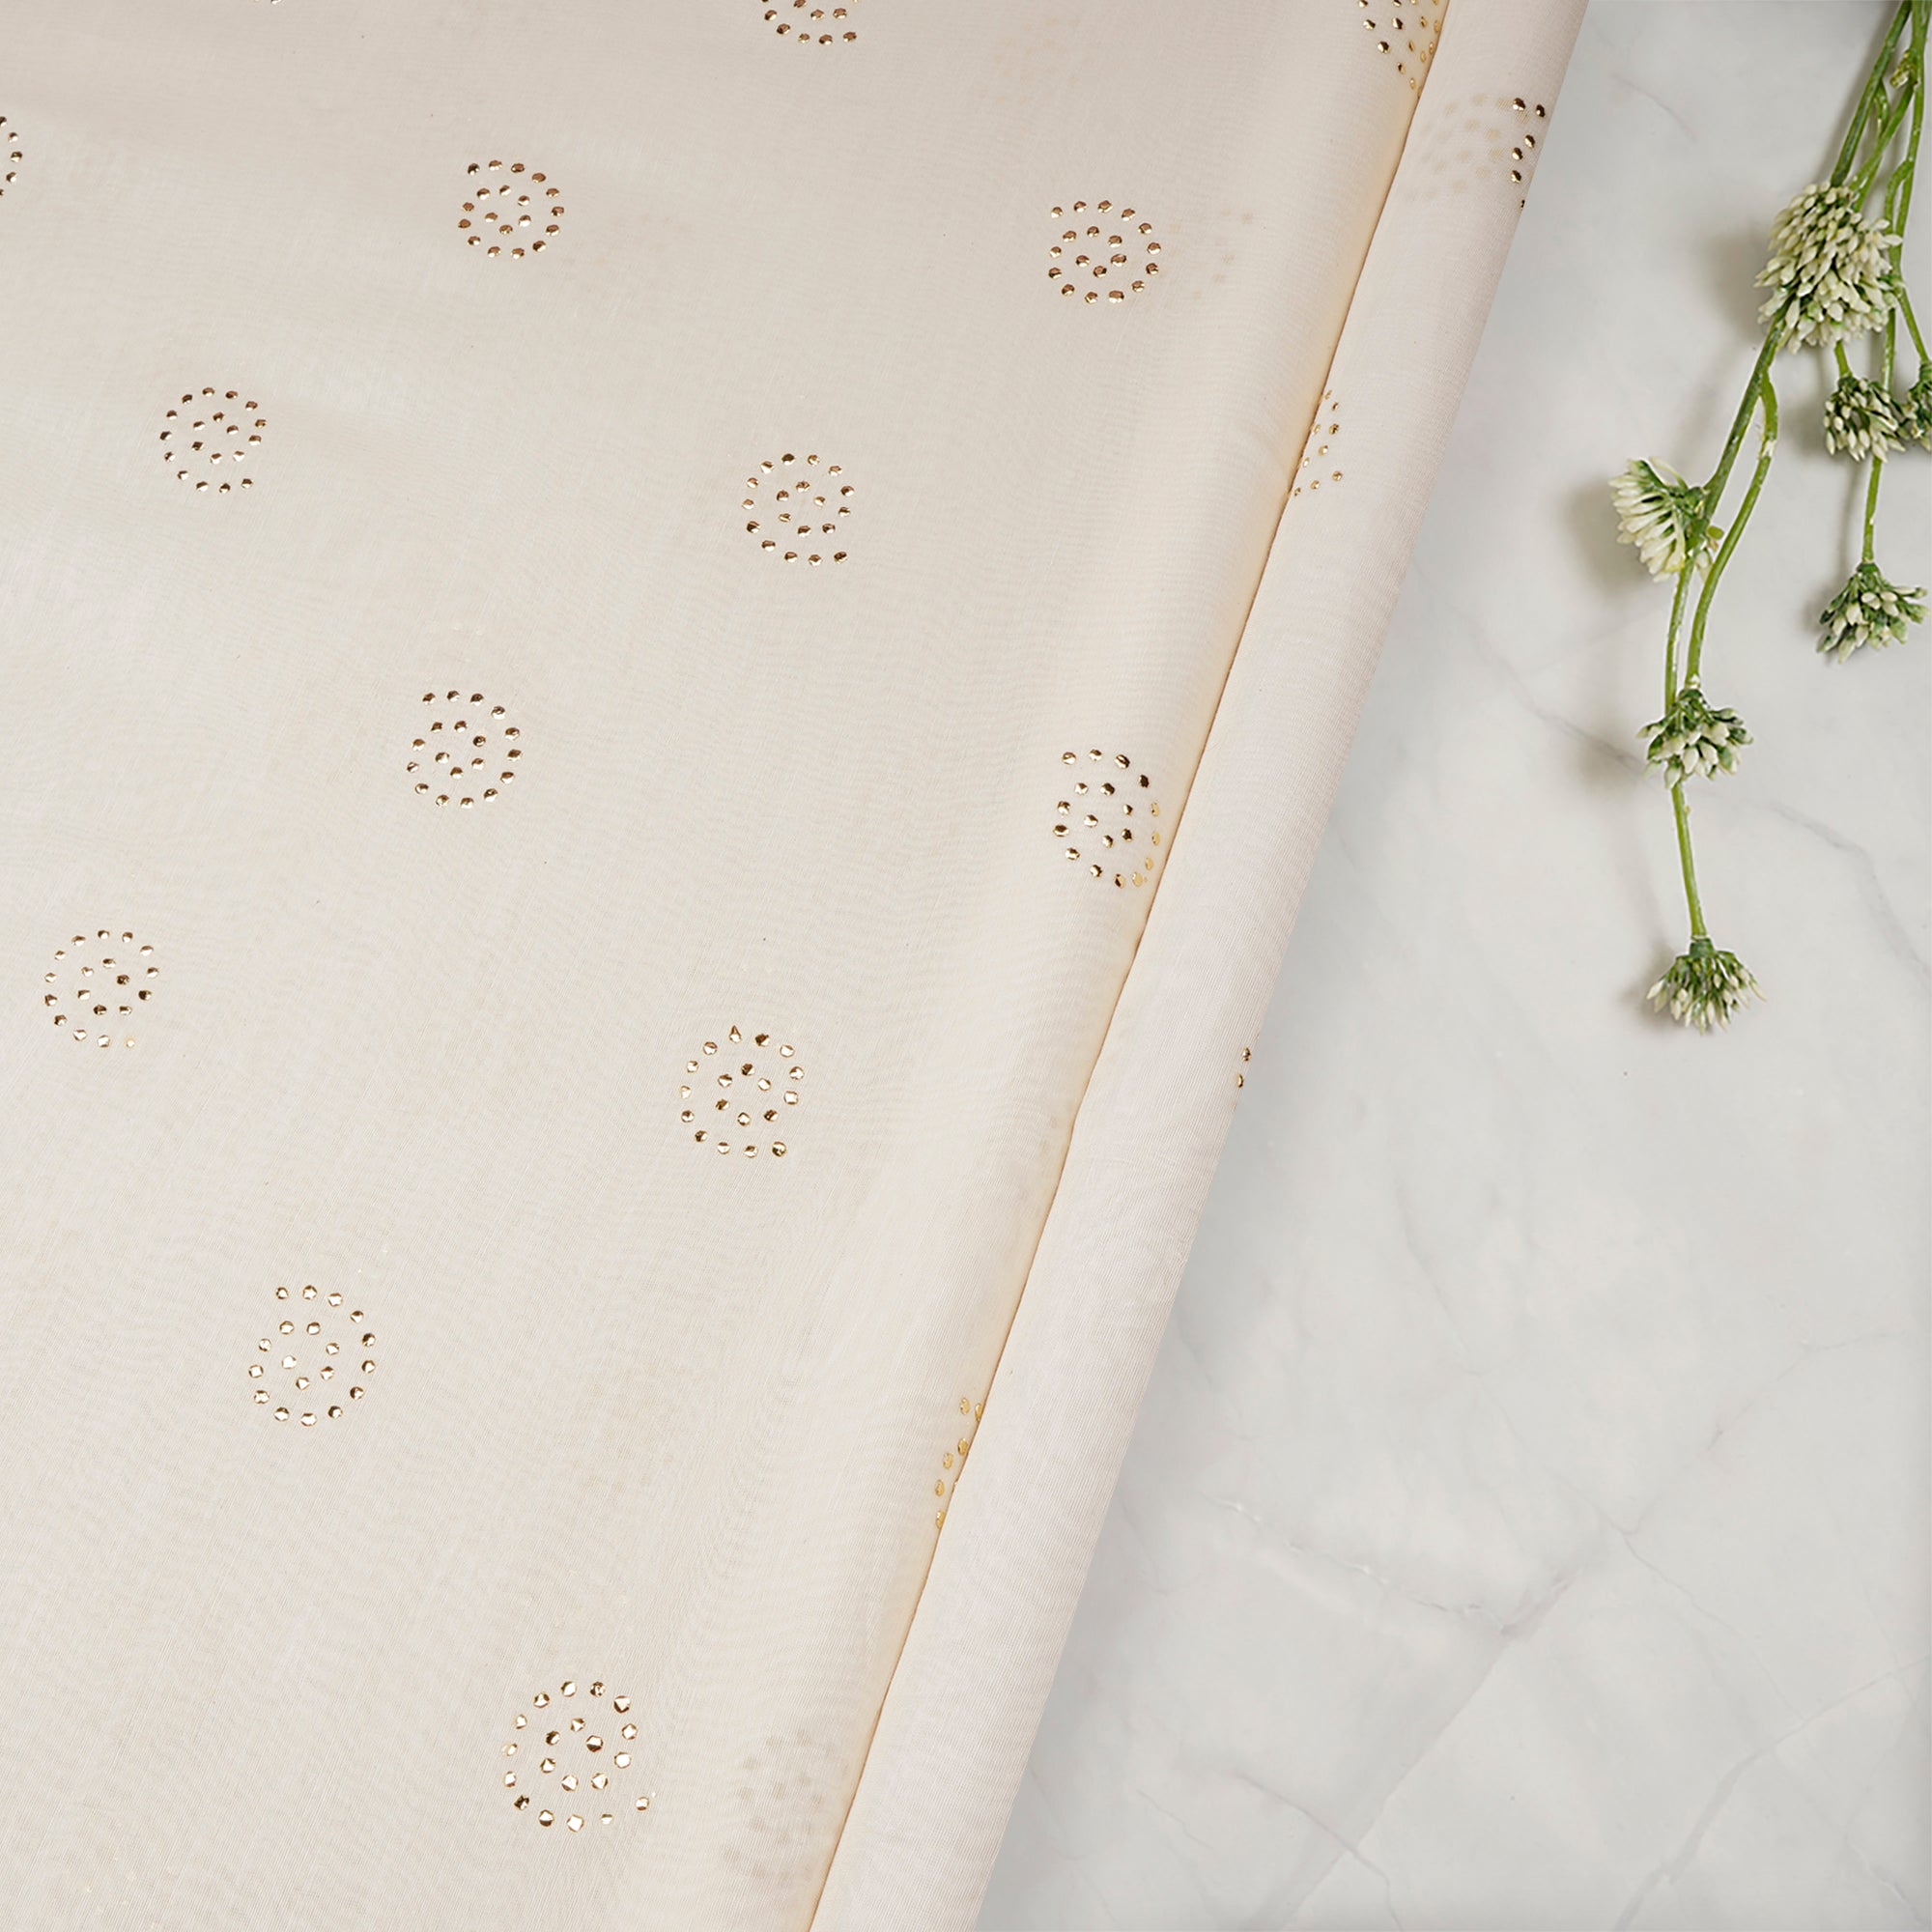 Off White Dyeable Mukaish Look Dewdrops Work Pure Fine Chanderi Fabric